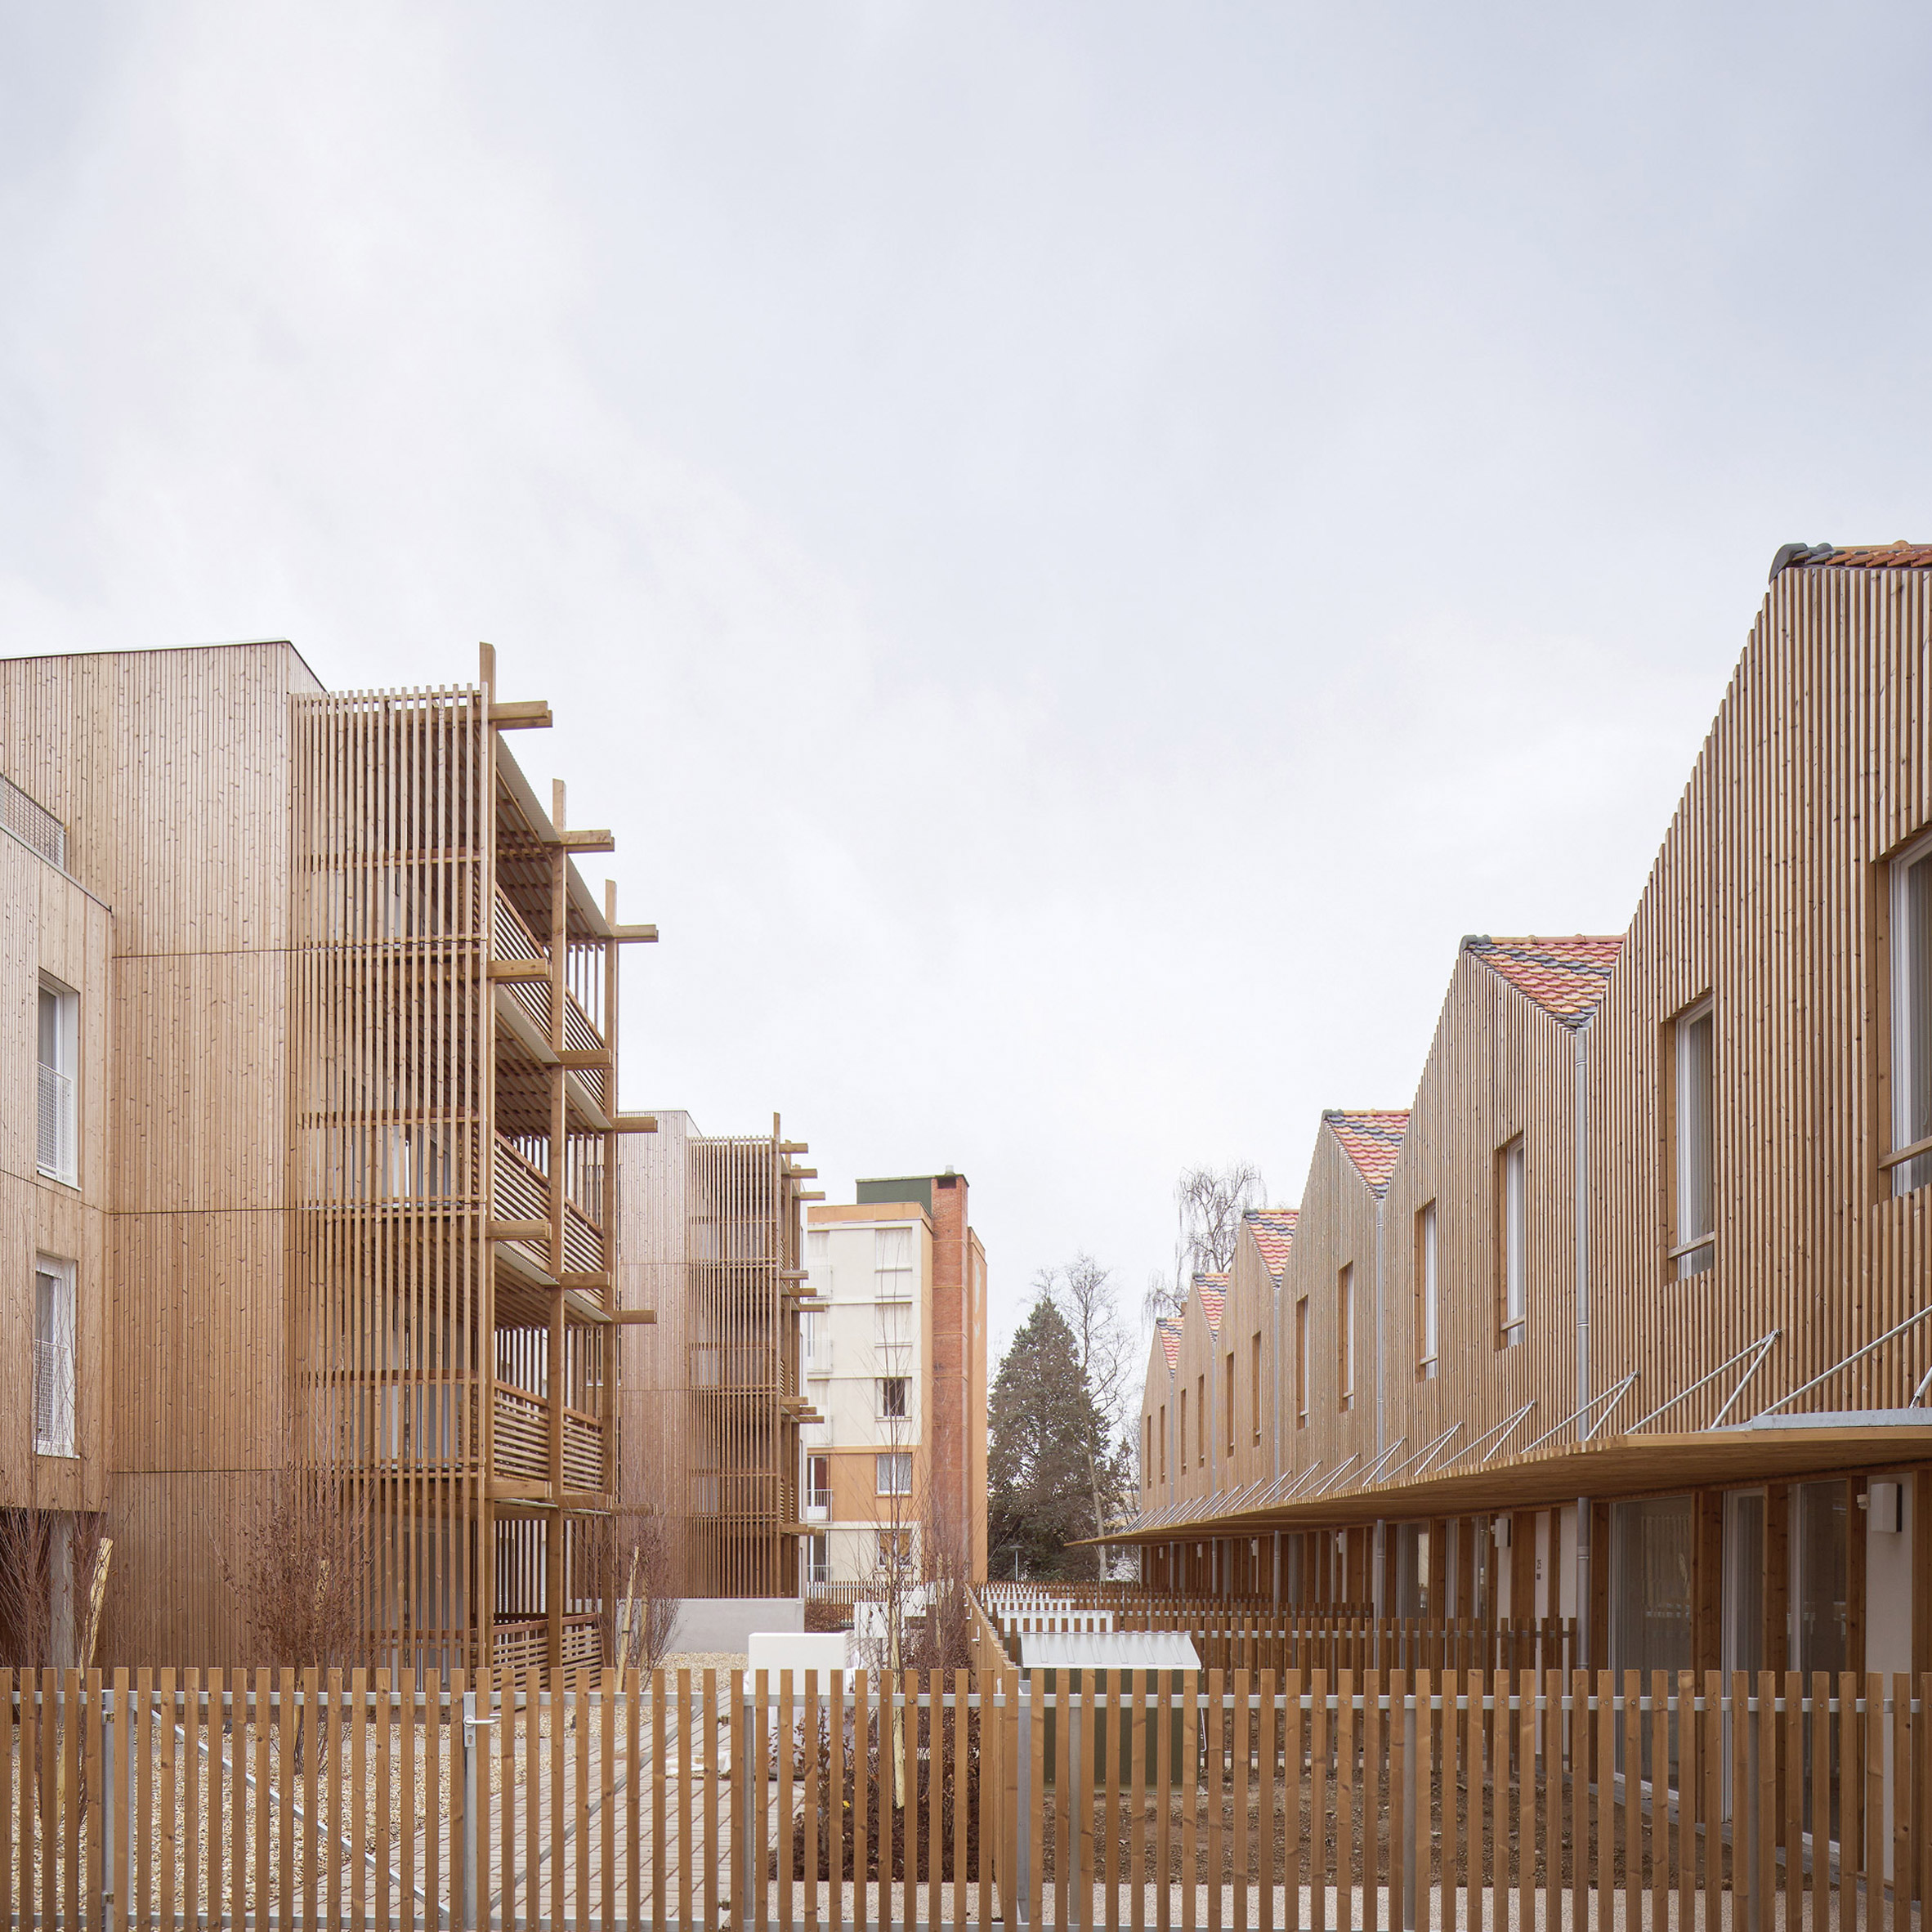 26 Social Housing by Odile and Guzy Architectes